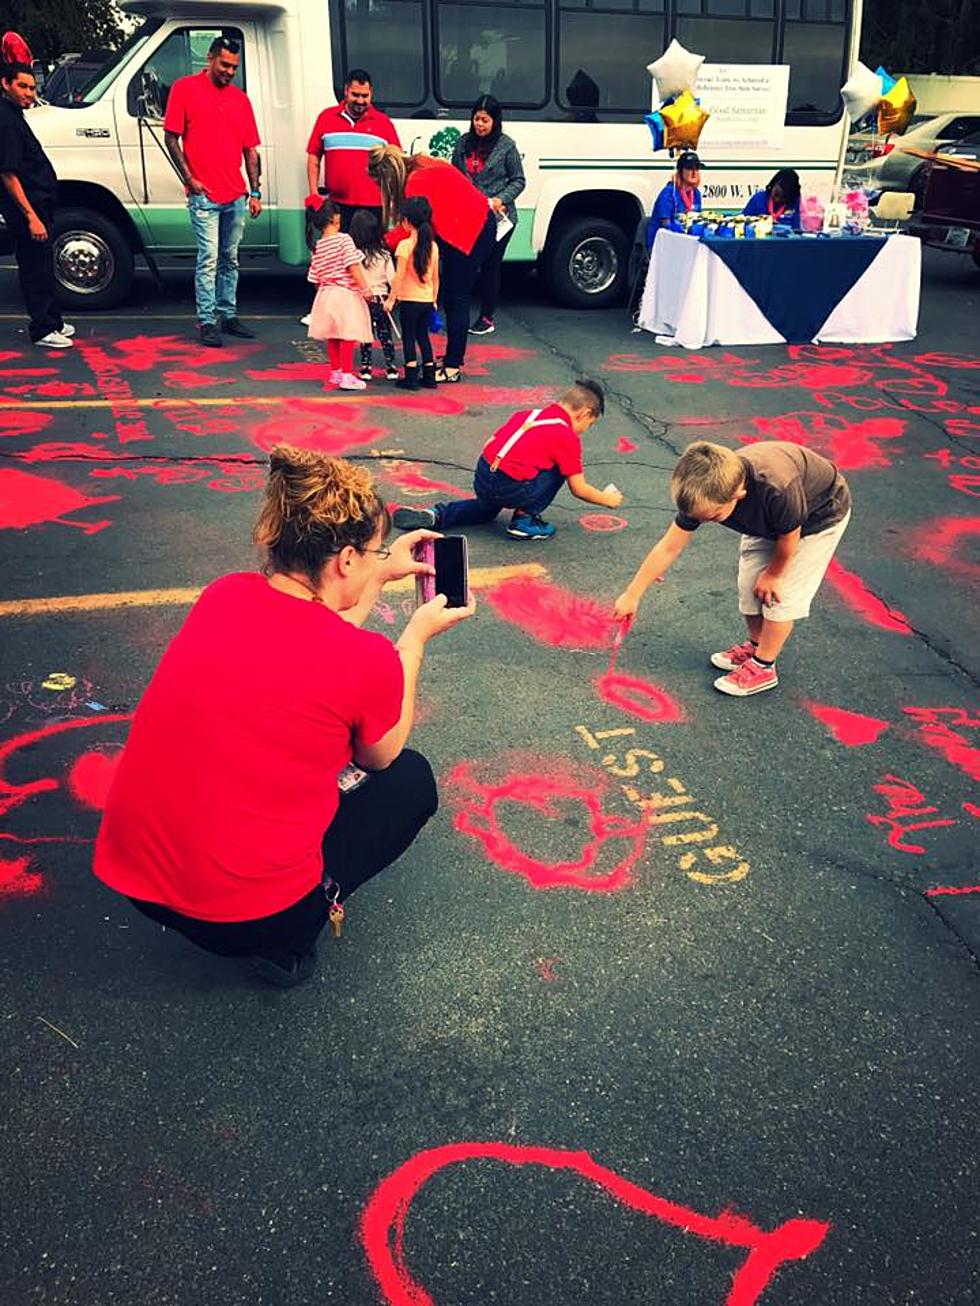 The Red Sand Project Event Went Very Well Saturday &#8212; Raising Awarness About Human Trafficking